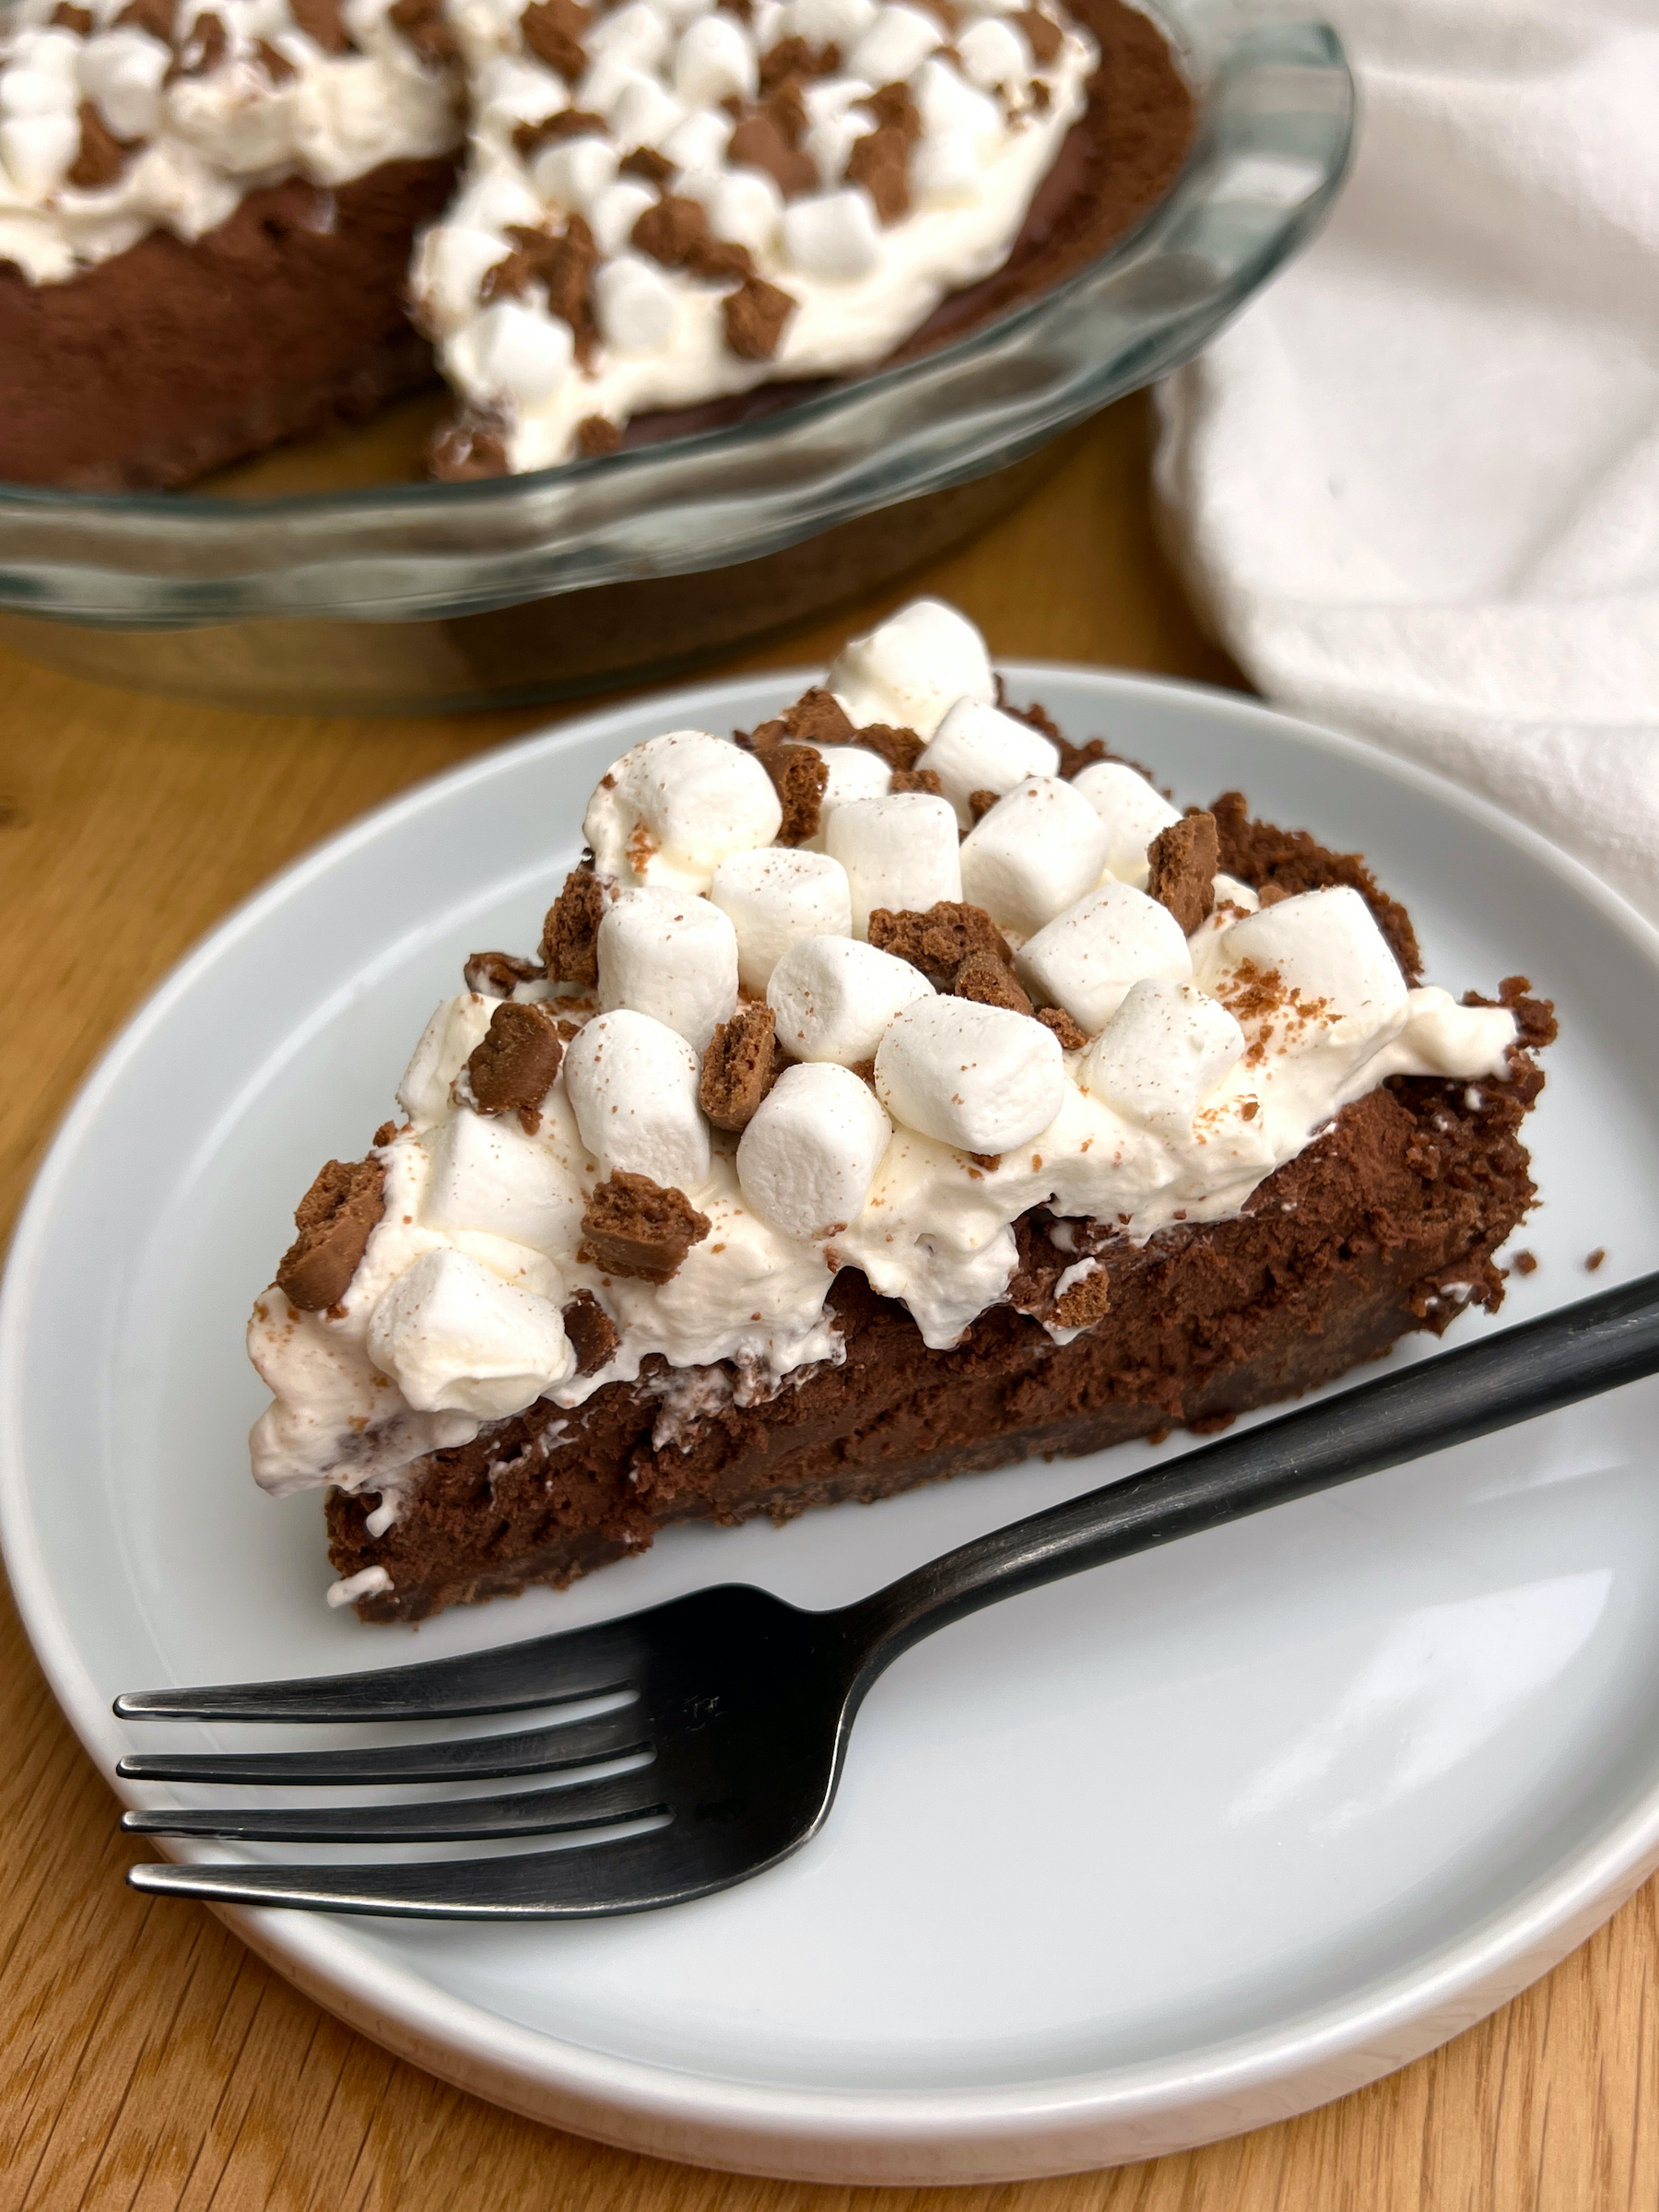 Slice of Hot Chocolate Pie on White Plate with Black Fork